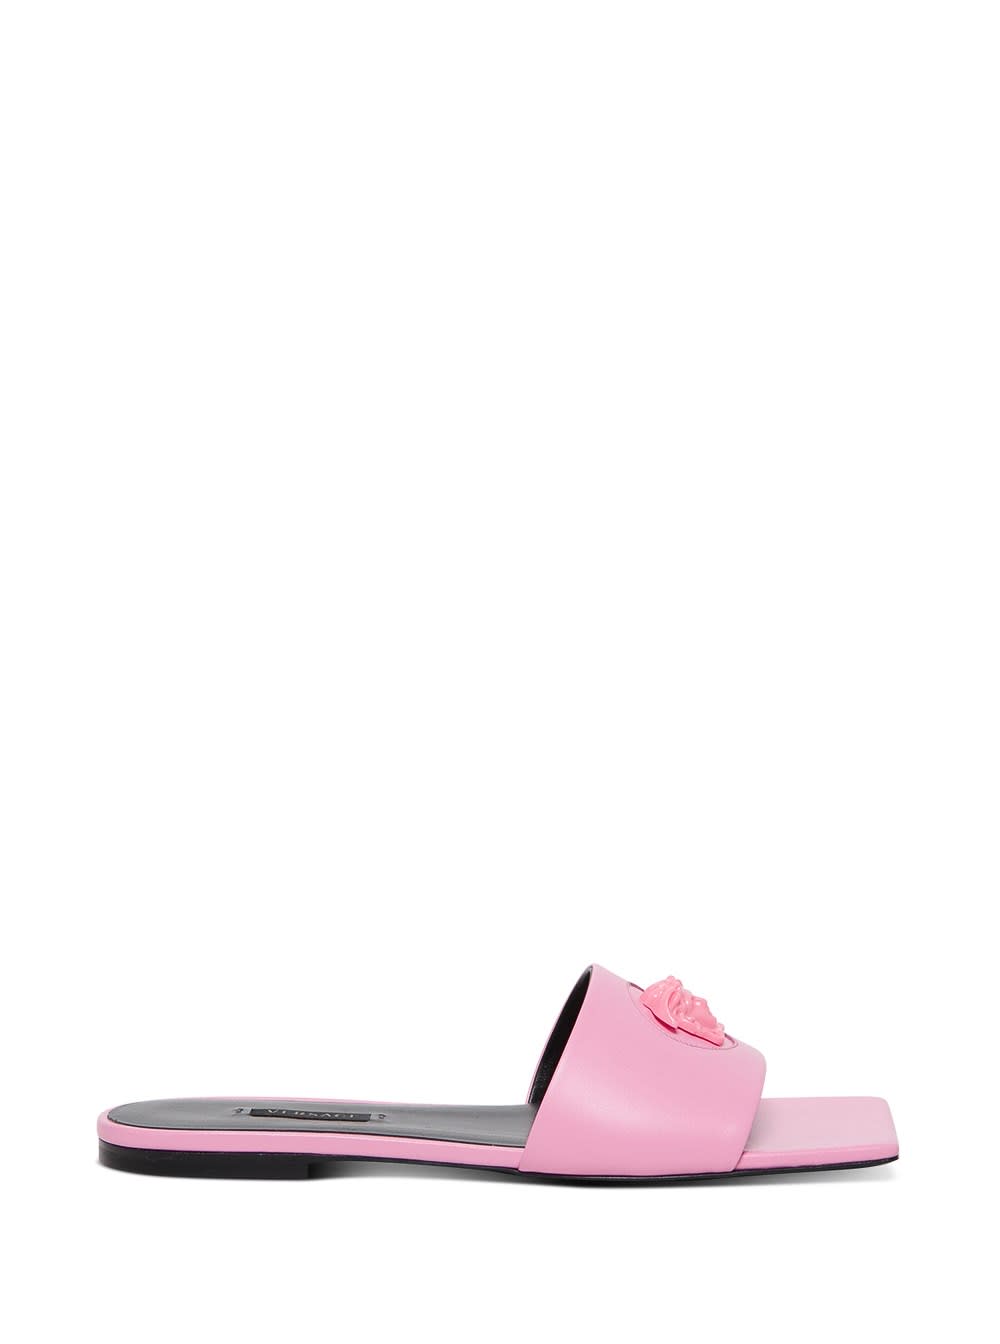 Buy Versace Pink Leather Mules With Medusa Logo online, shop Versace shoes with free shipping